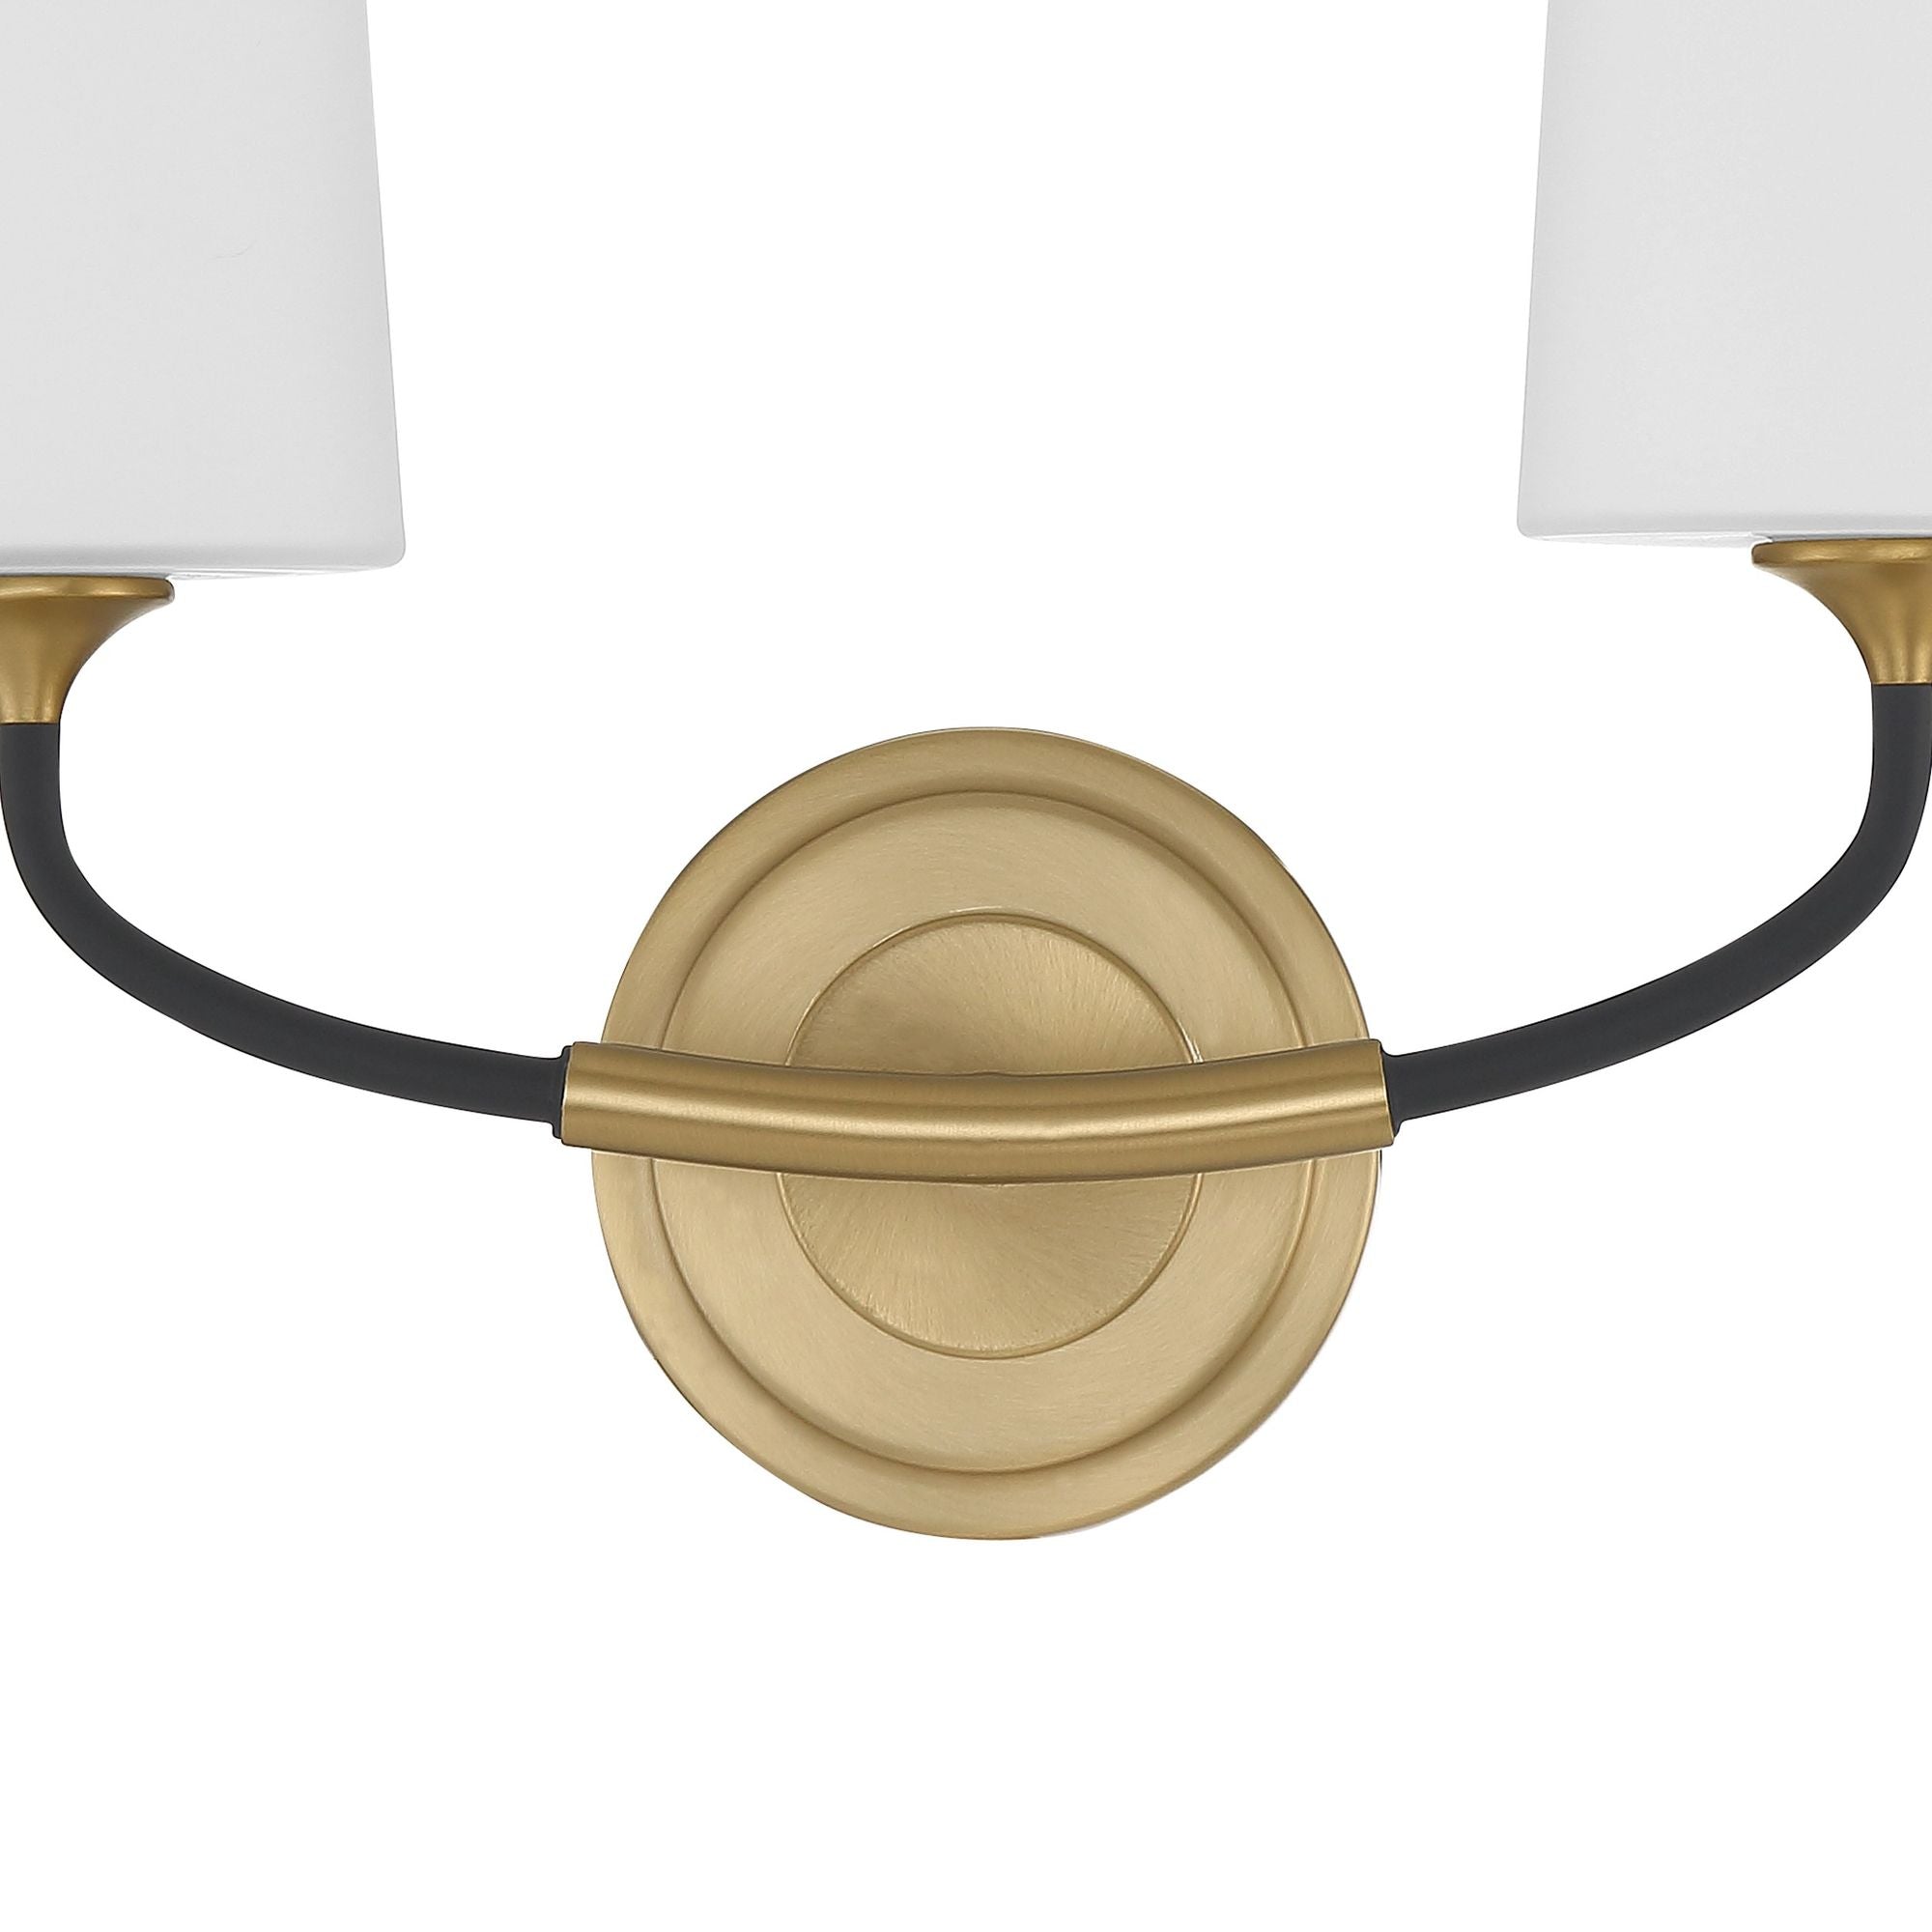 Niles 2 Light Black Forged + Modern Gold Wall Mount